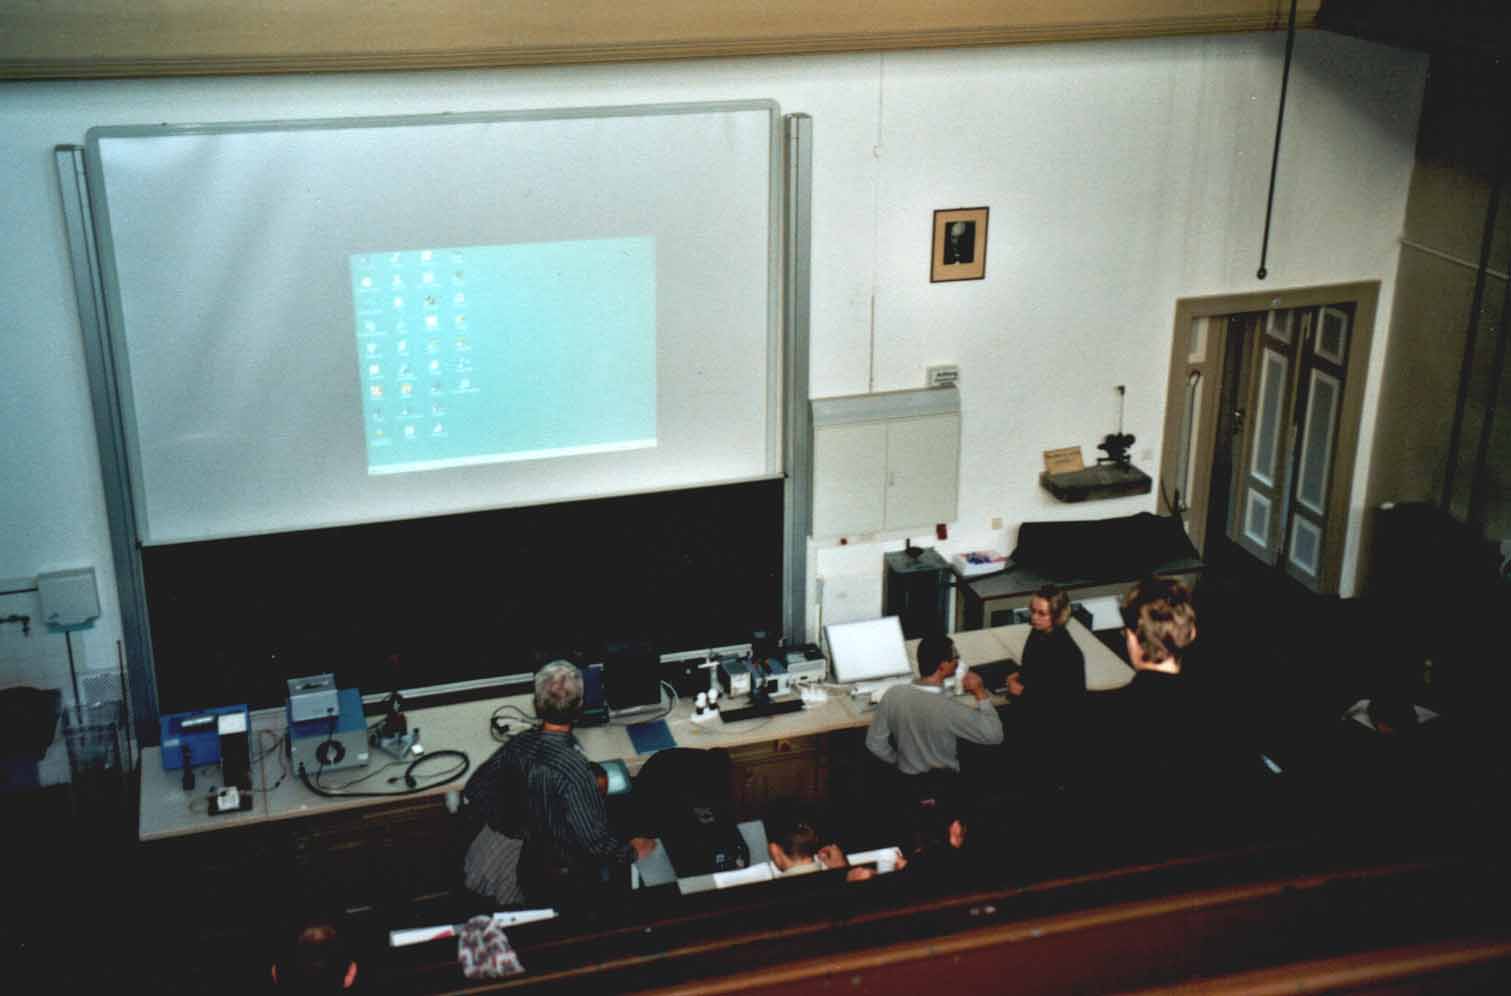 the lecture room, 63 Kb